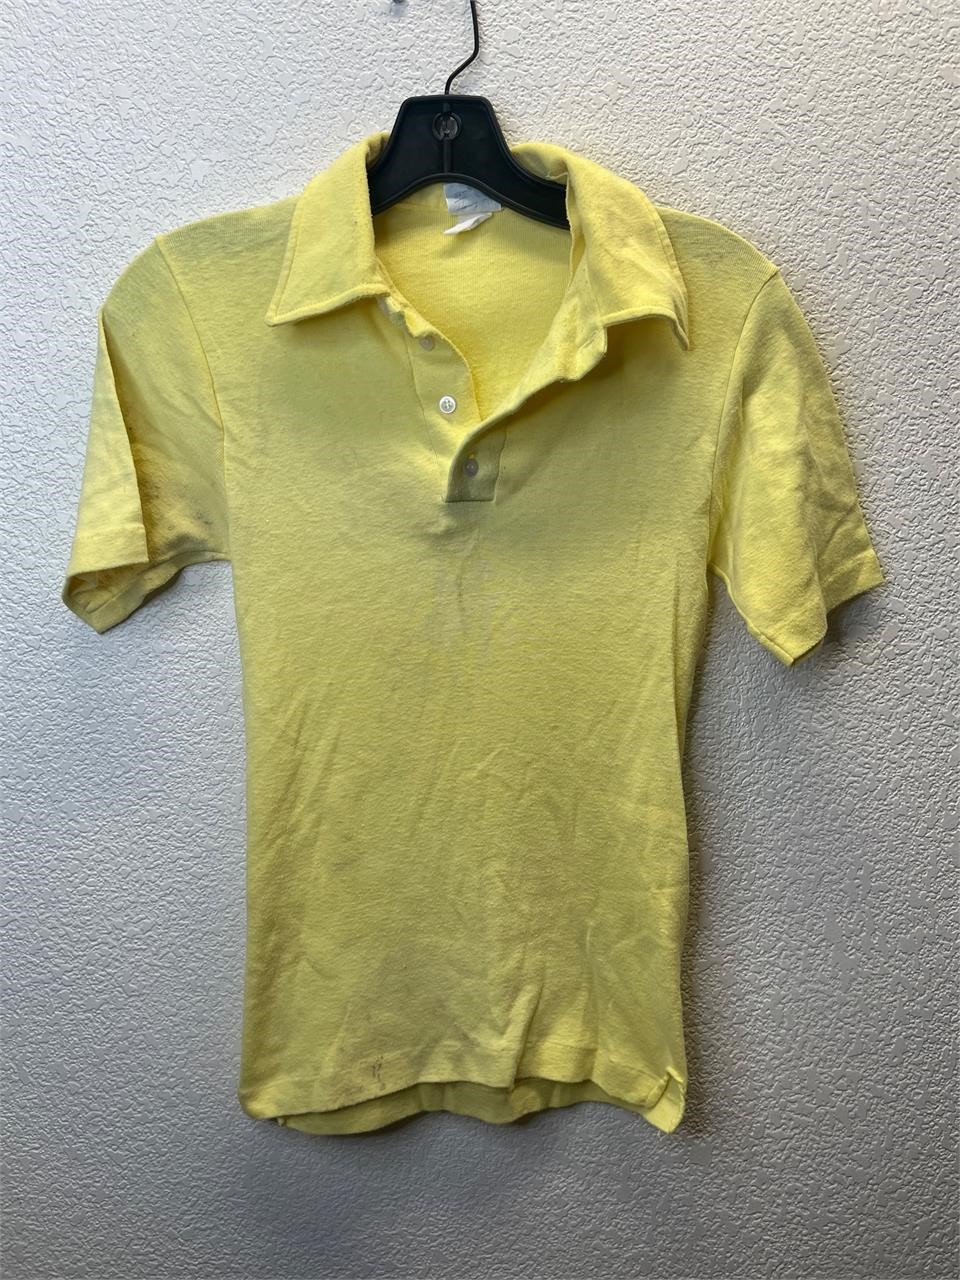 7/8/24 Vintage clothing Auction